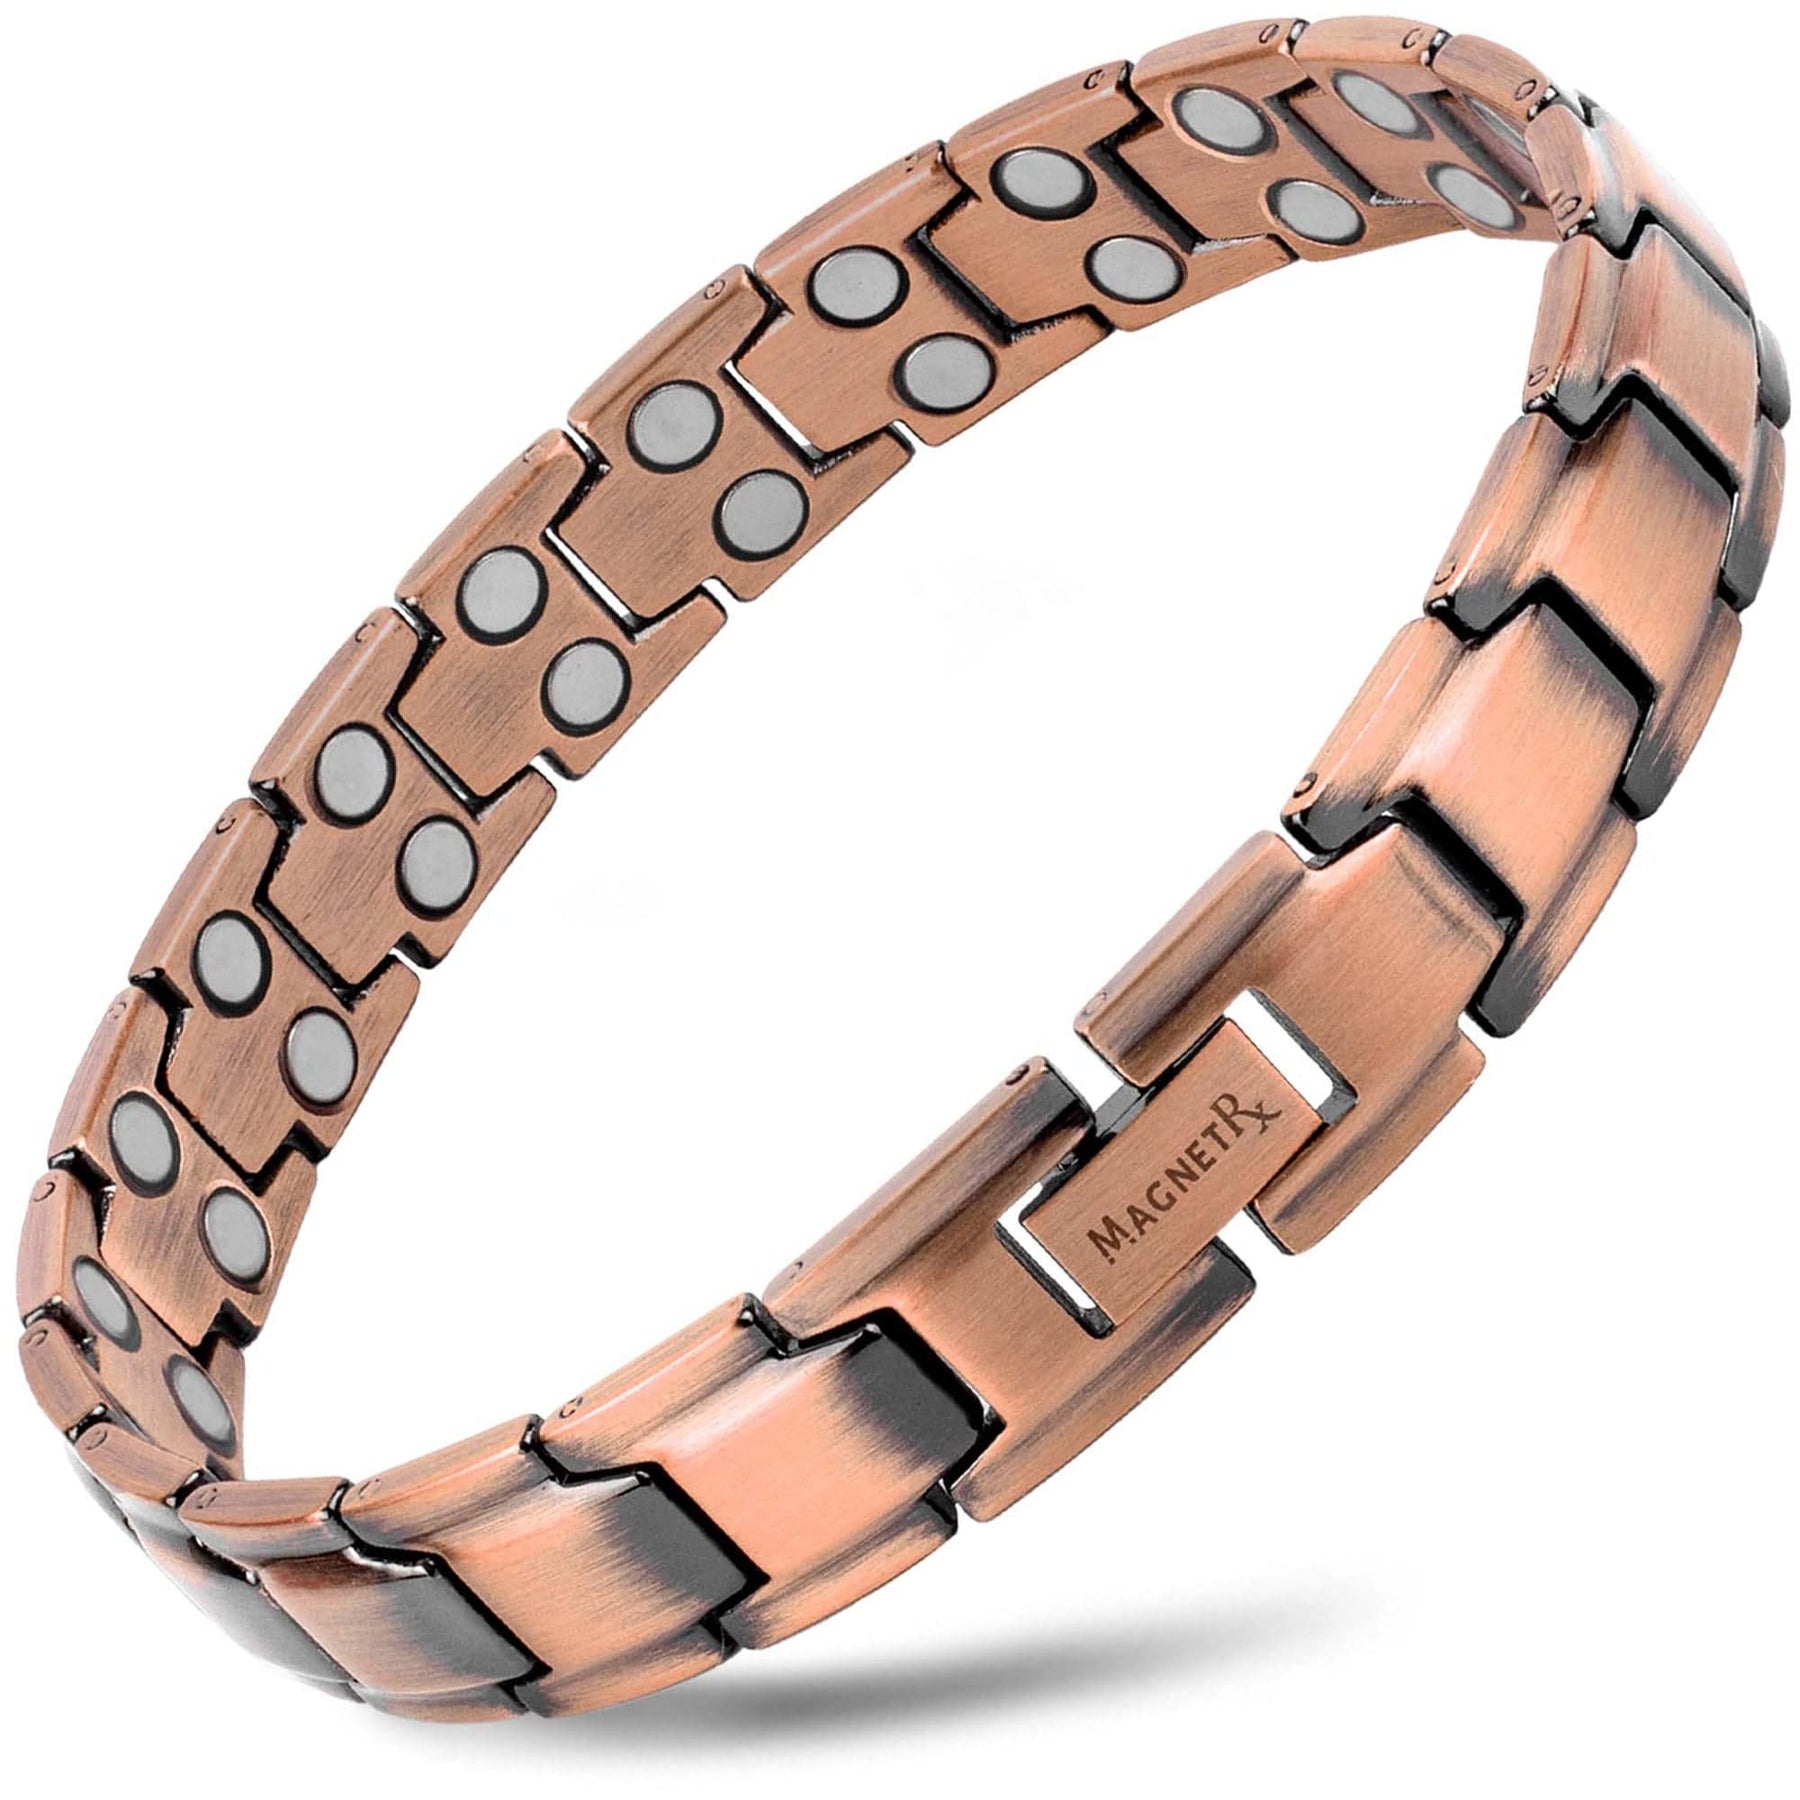 Adjustable Pure Copper Magnetic Bracelet For Men Health And Energy Benefits  With Cuff Braces And Susanna Bangles Model: Copper2555 From Jfunq, $29.6 |  DHgate.Com